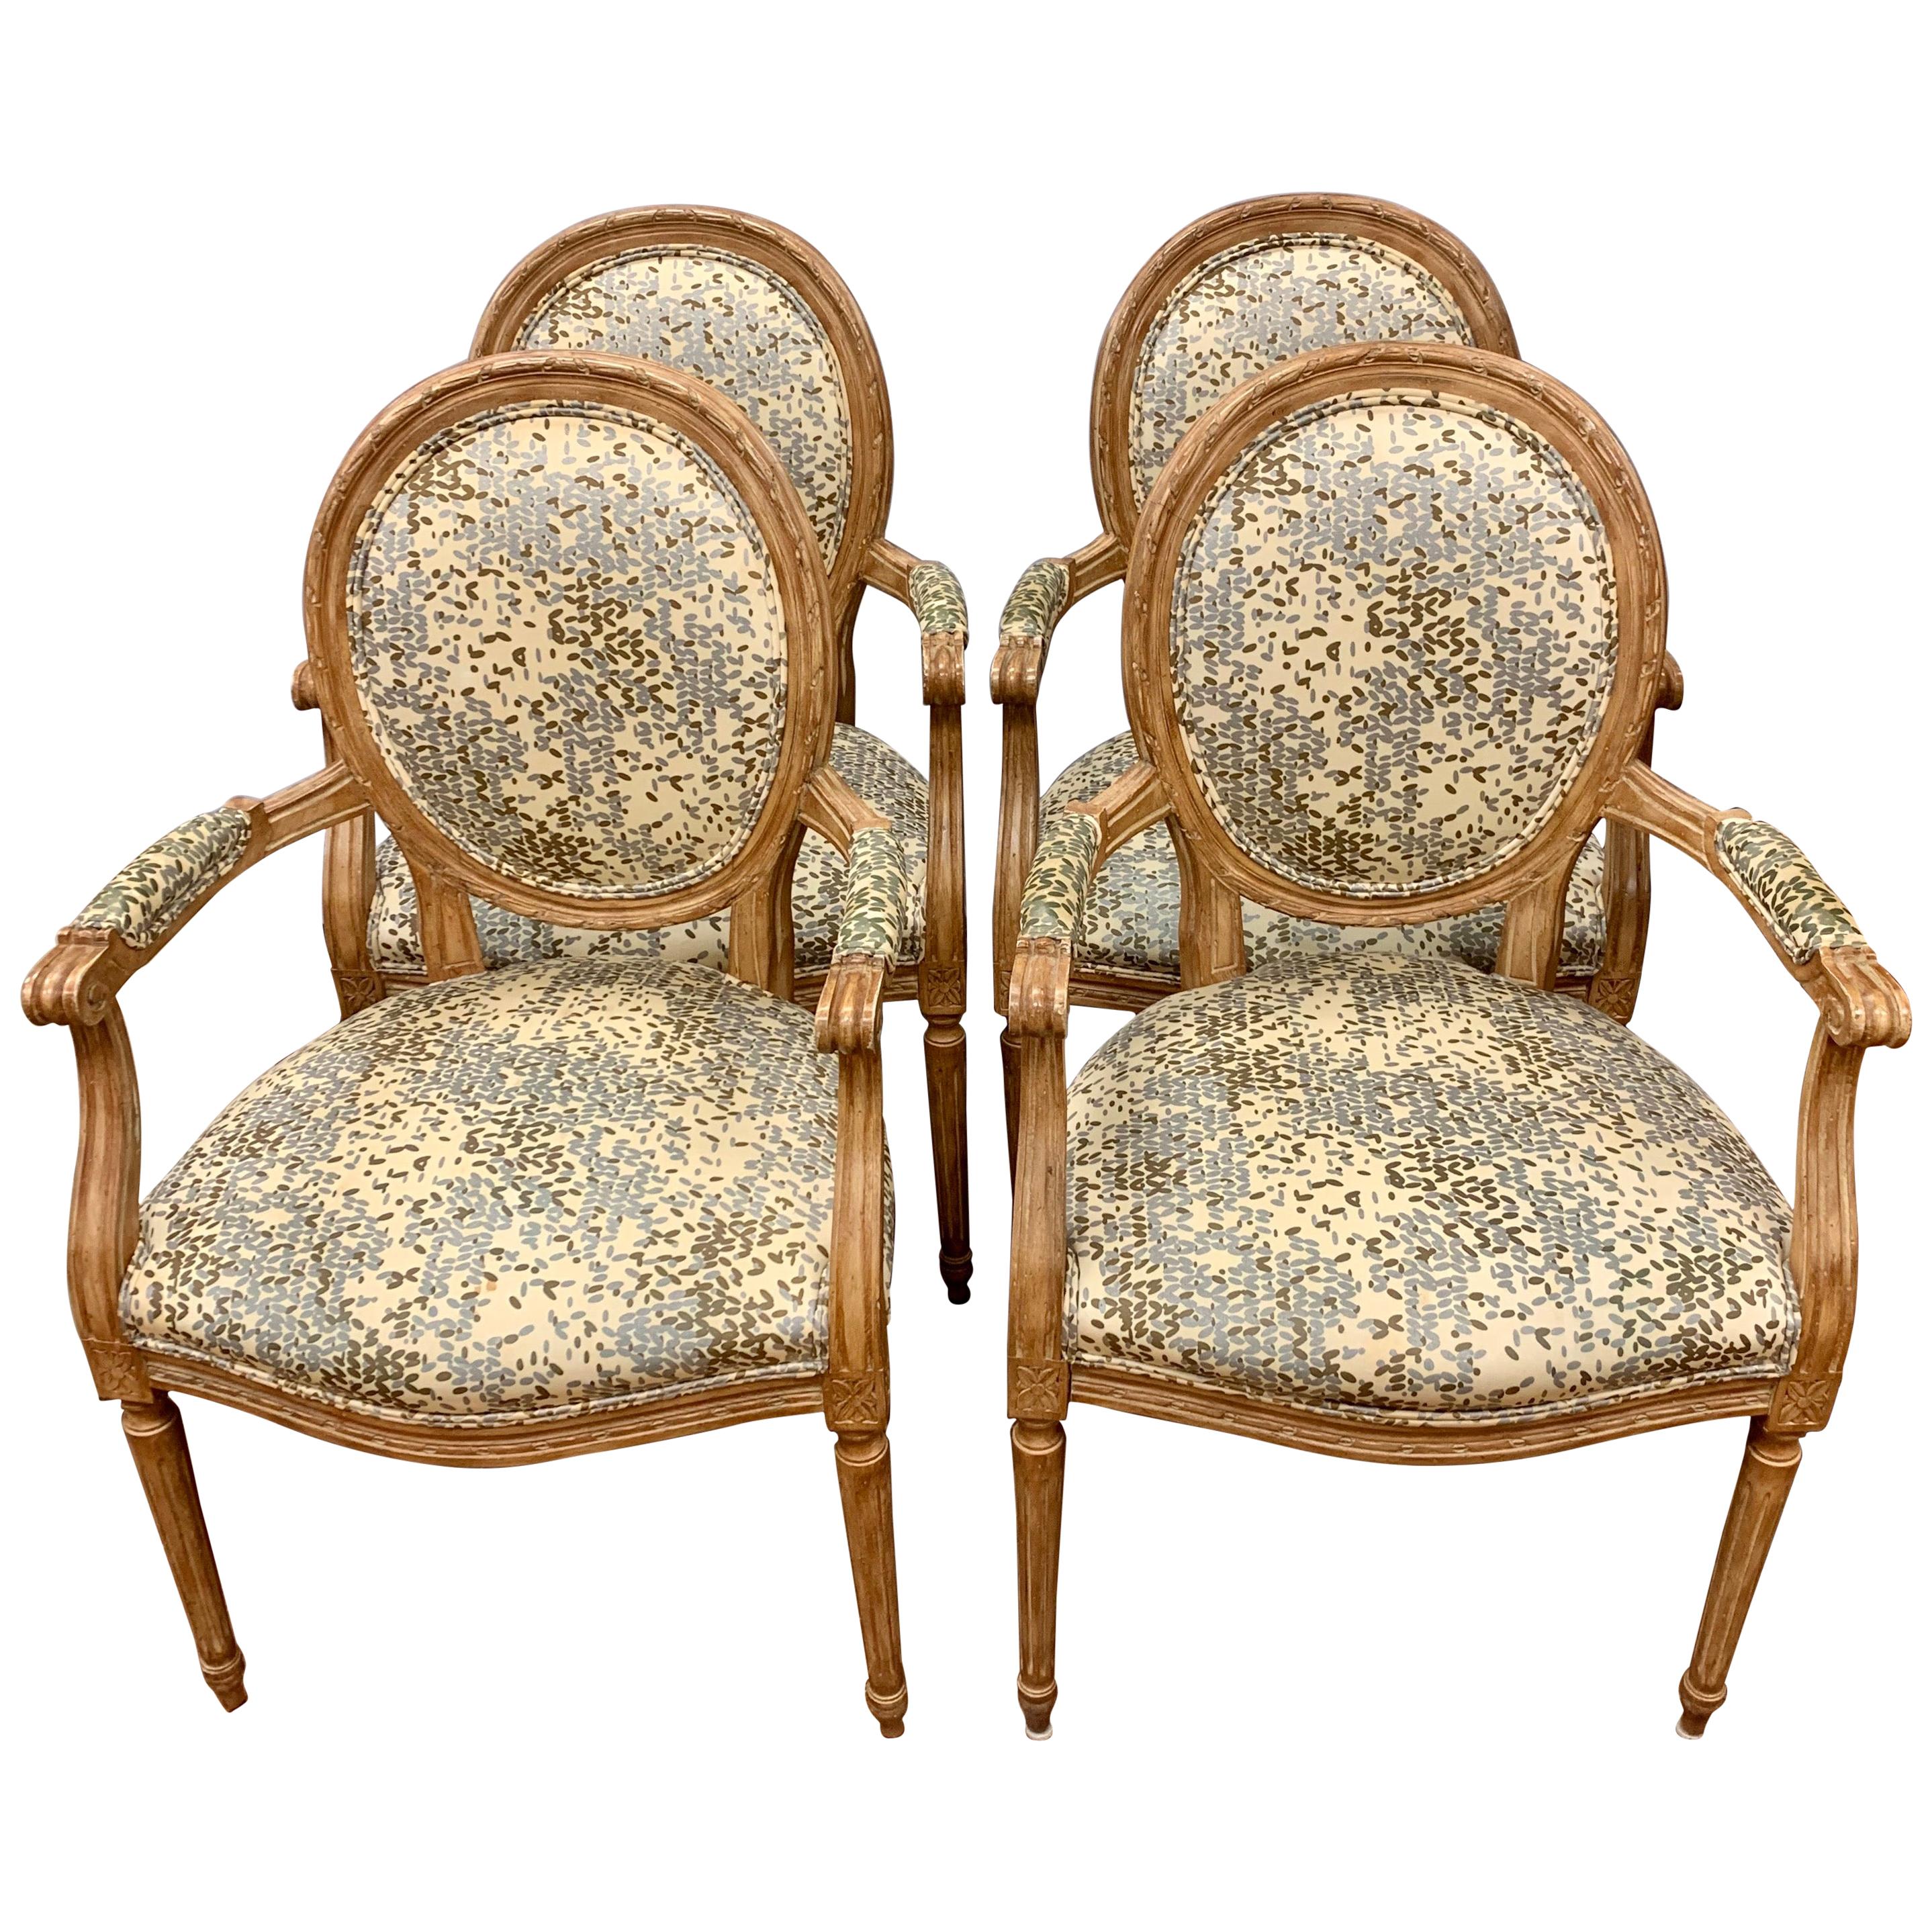 Set of French Louis XVI Carved Oval Back Fruitwood Armchairs with Kravet Fabric